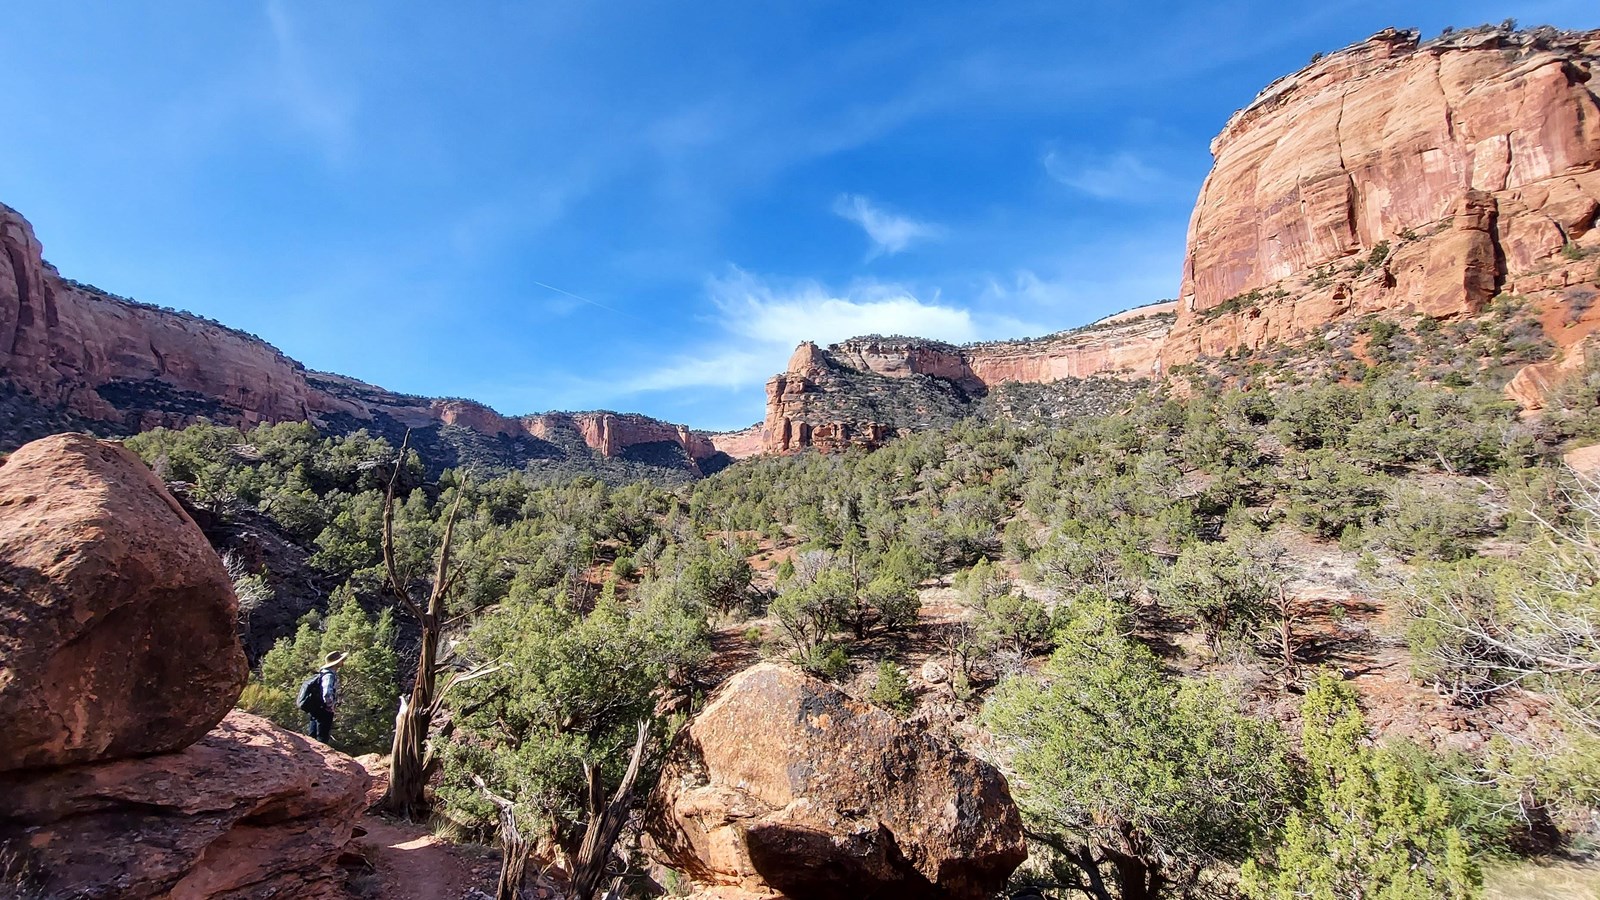 craggy black rock in forested canyon bottoms below towering red-orange sandstone cliffs